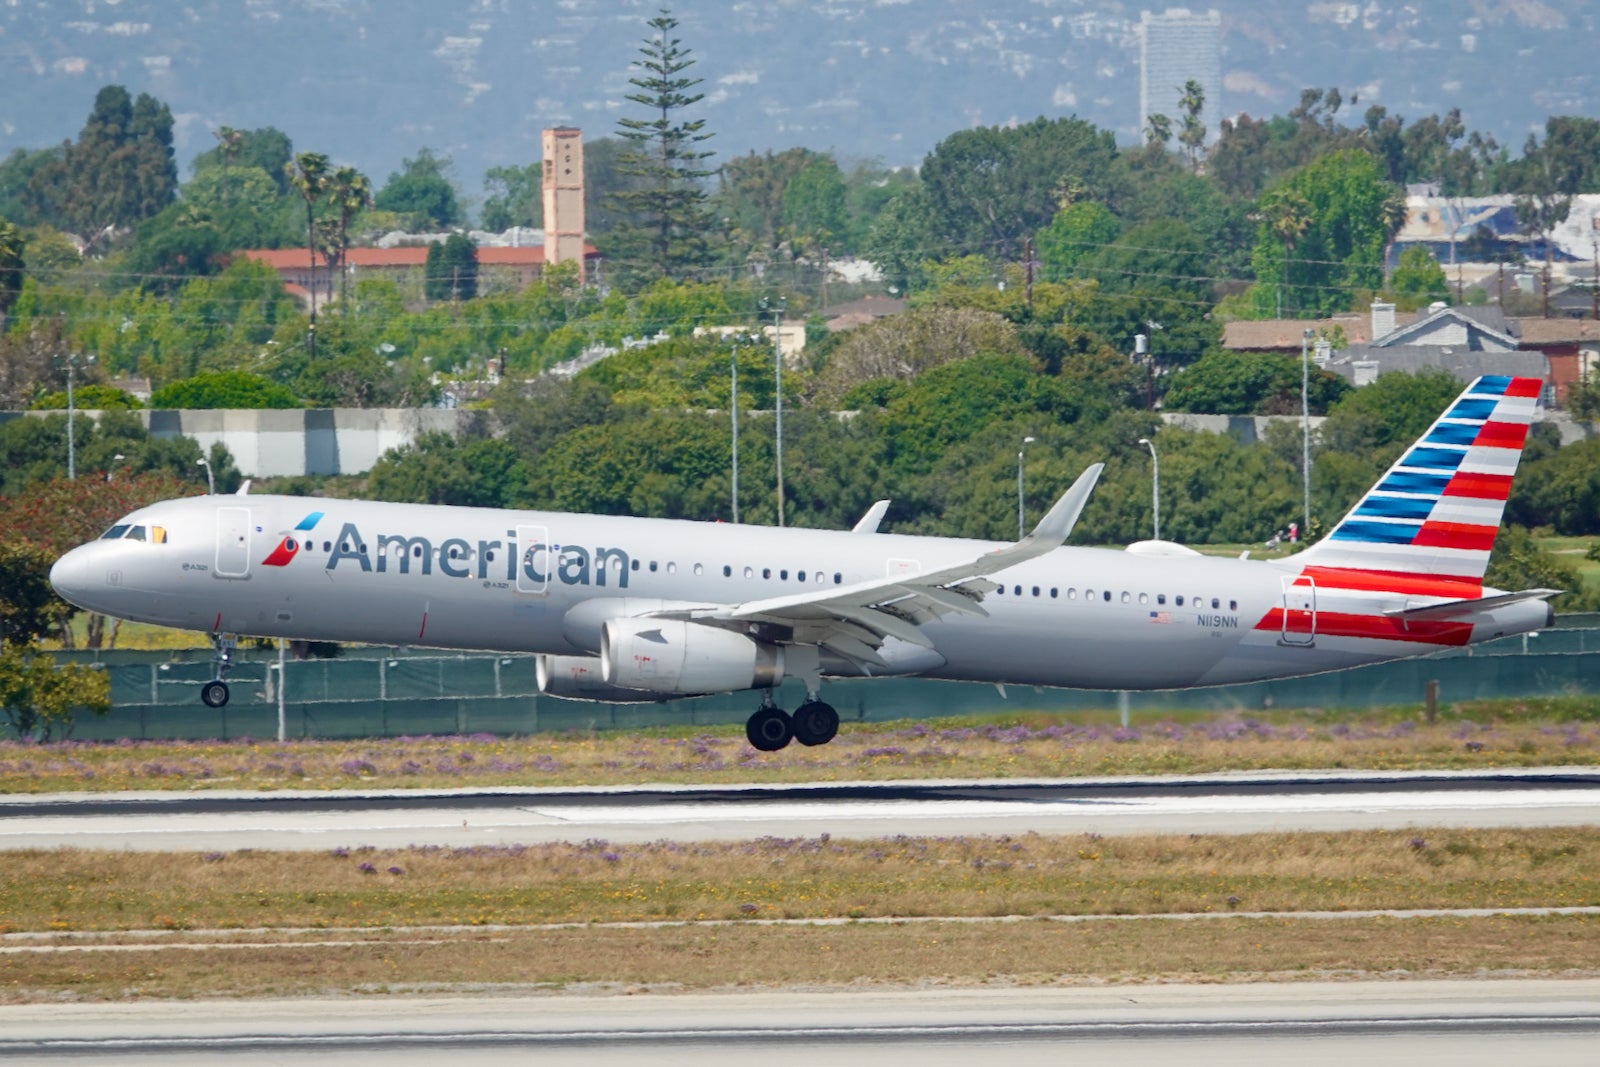 American Airlines Airbus A321T